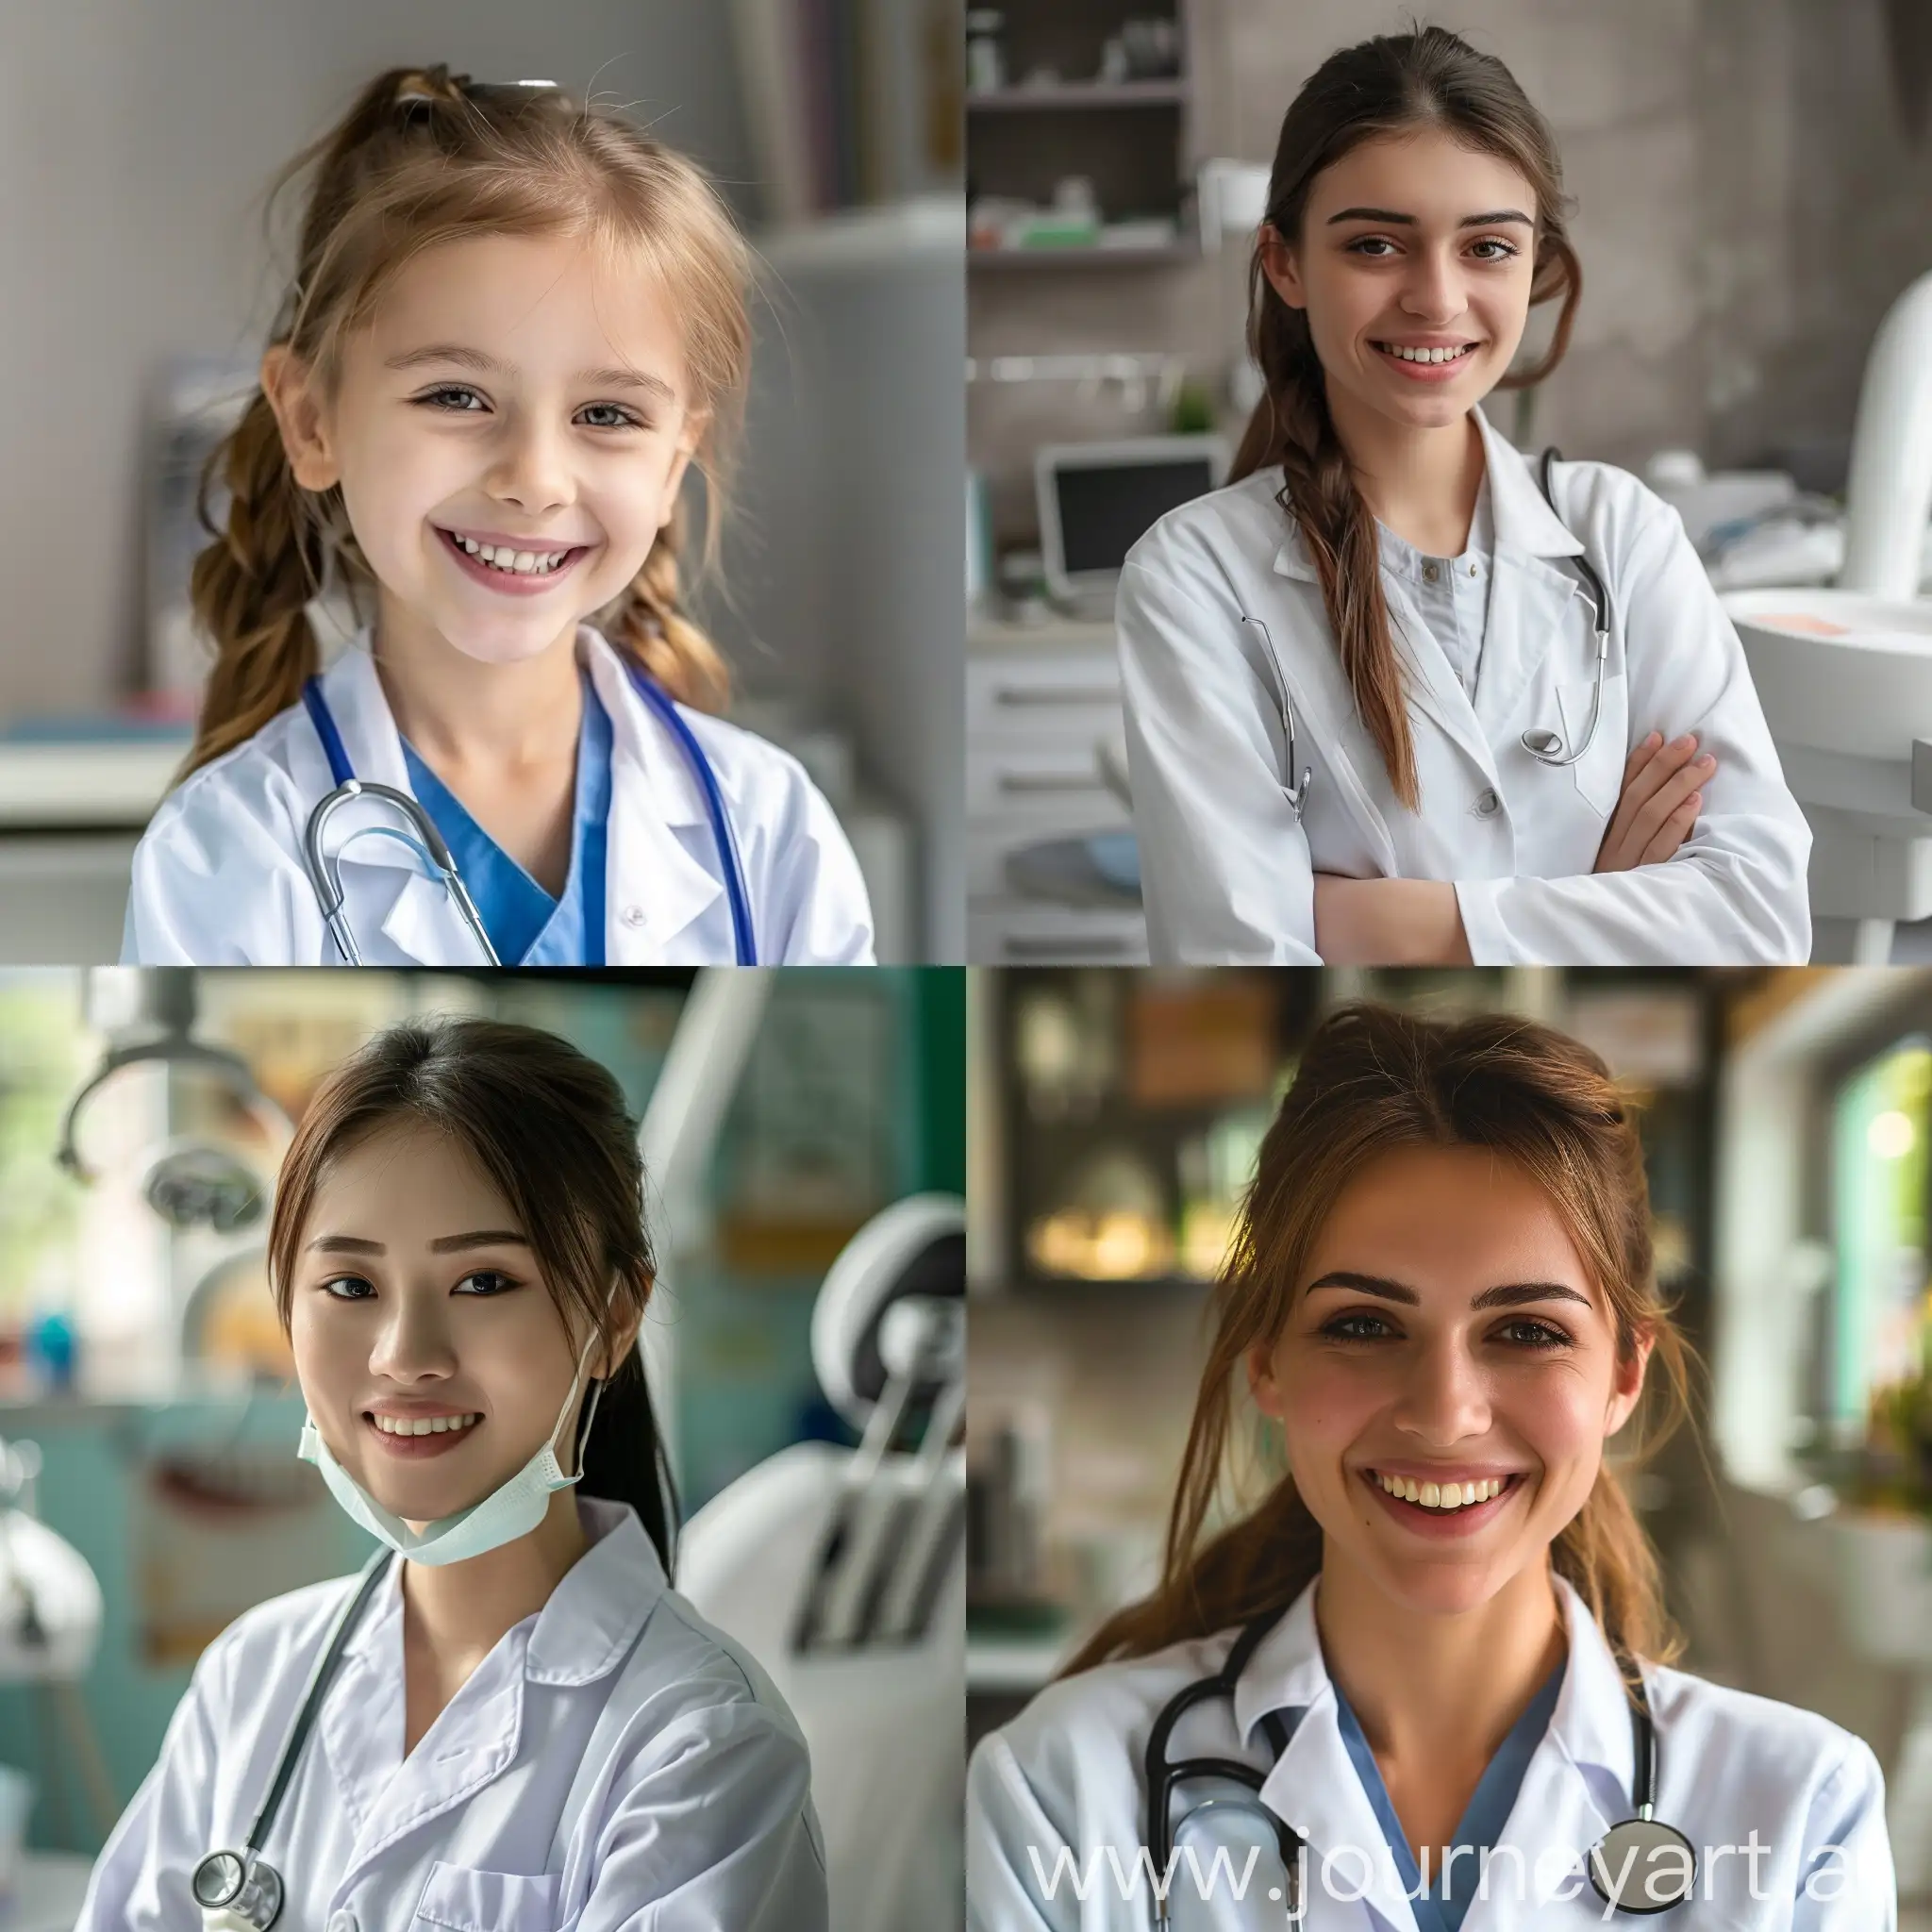 A cute little smiling lady dentist without stethoscope